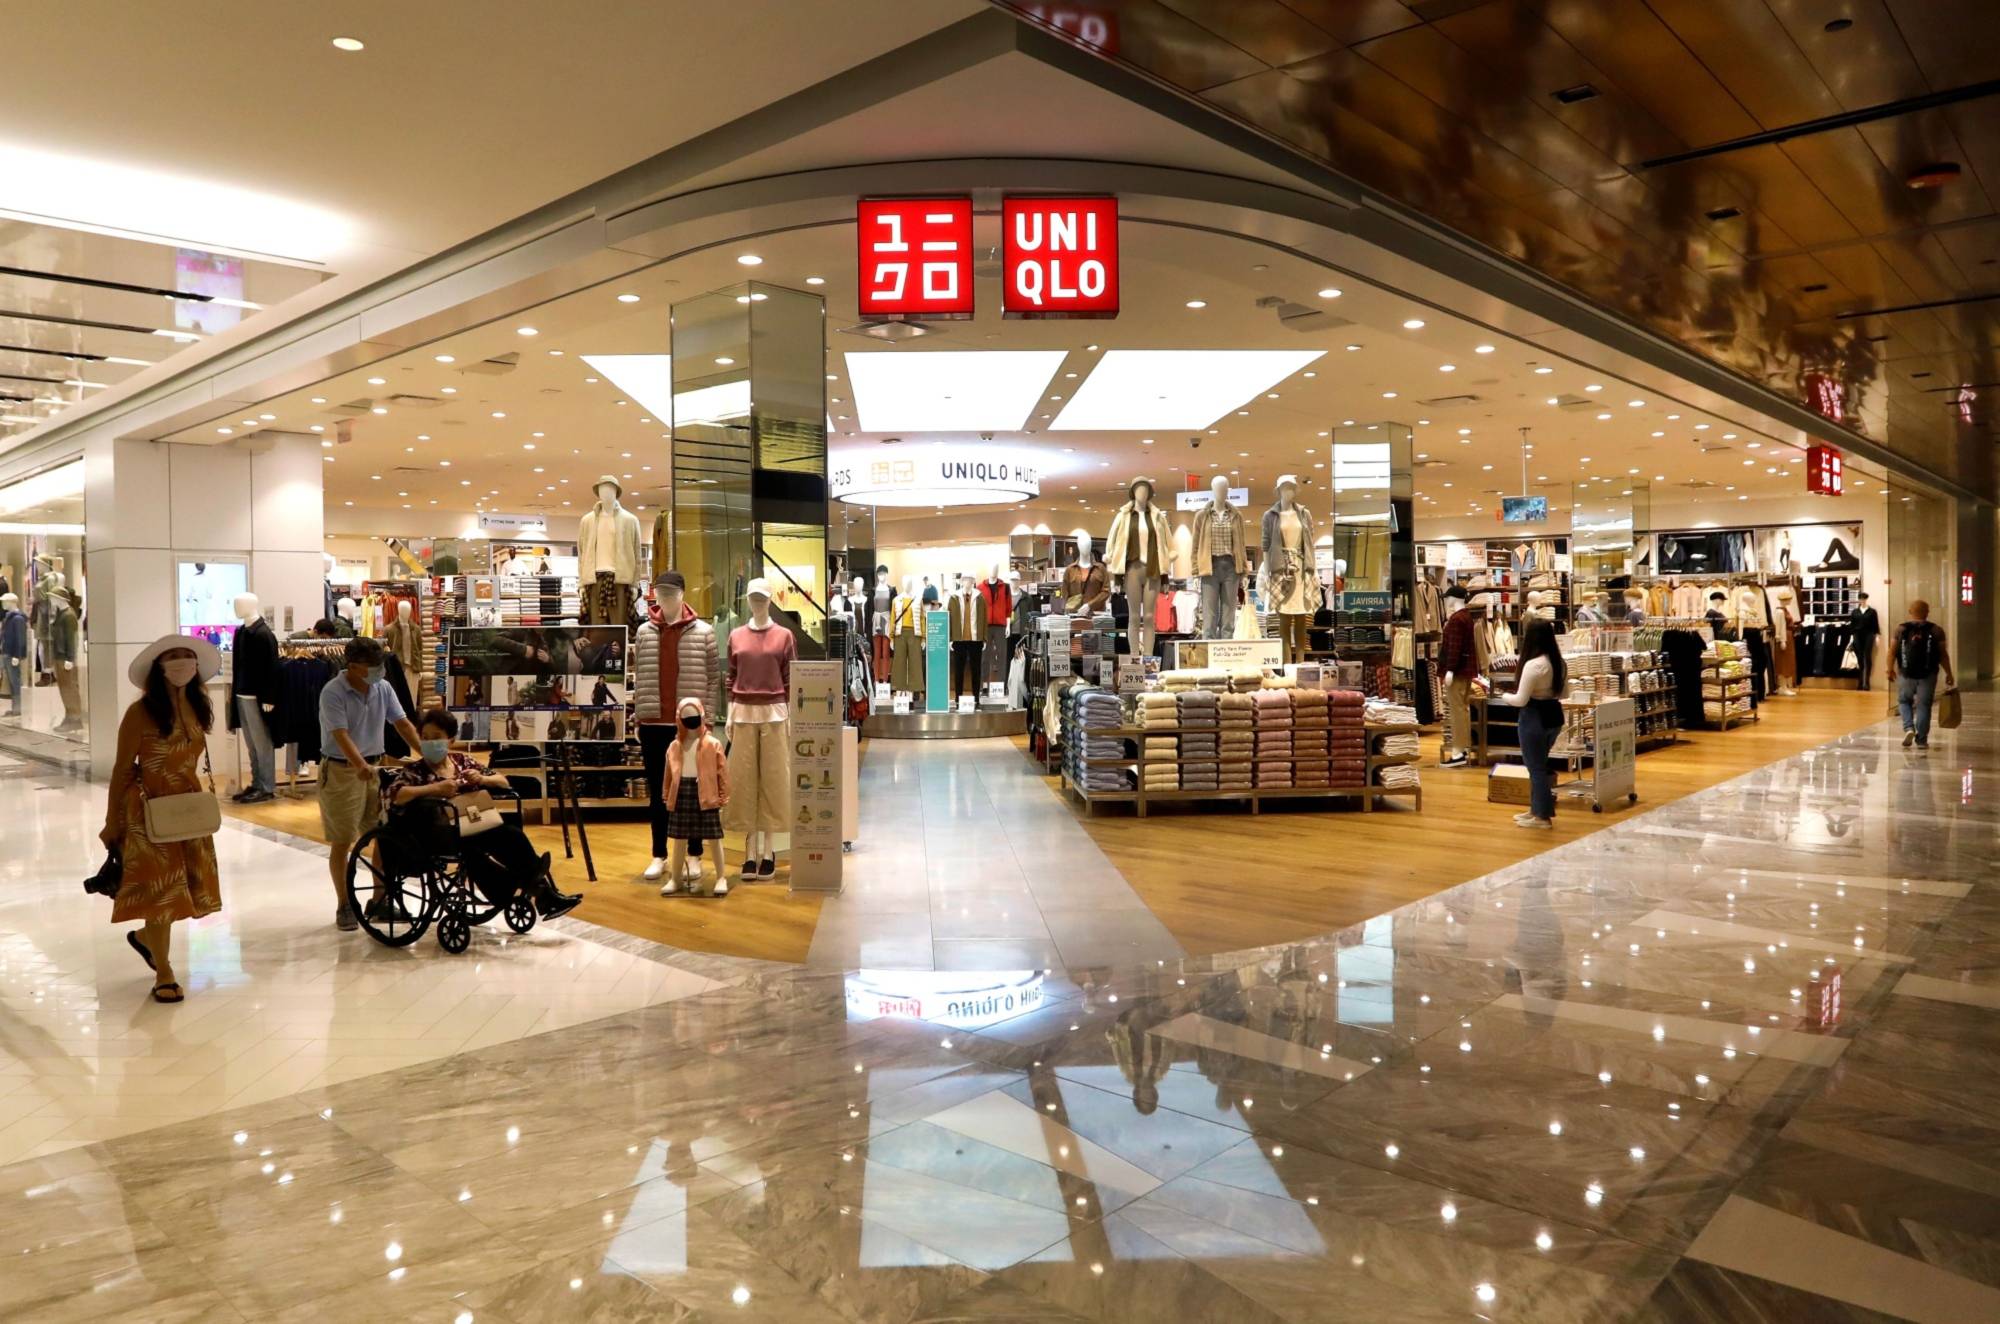 How to get to UNIQLO in Singapore by Metro or Bus